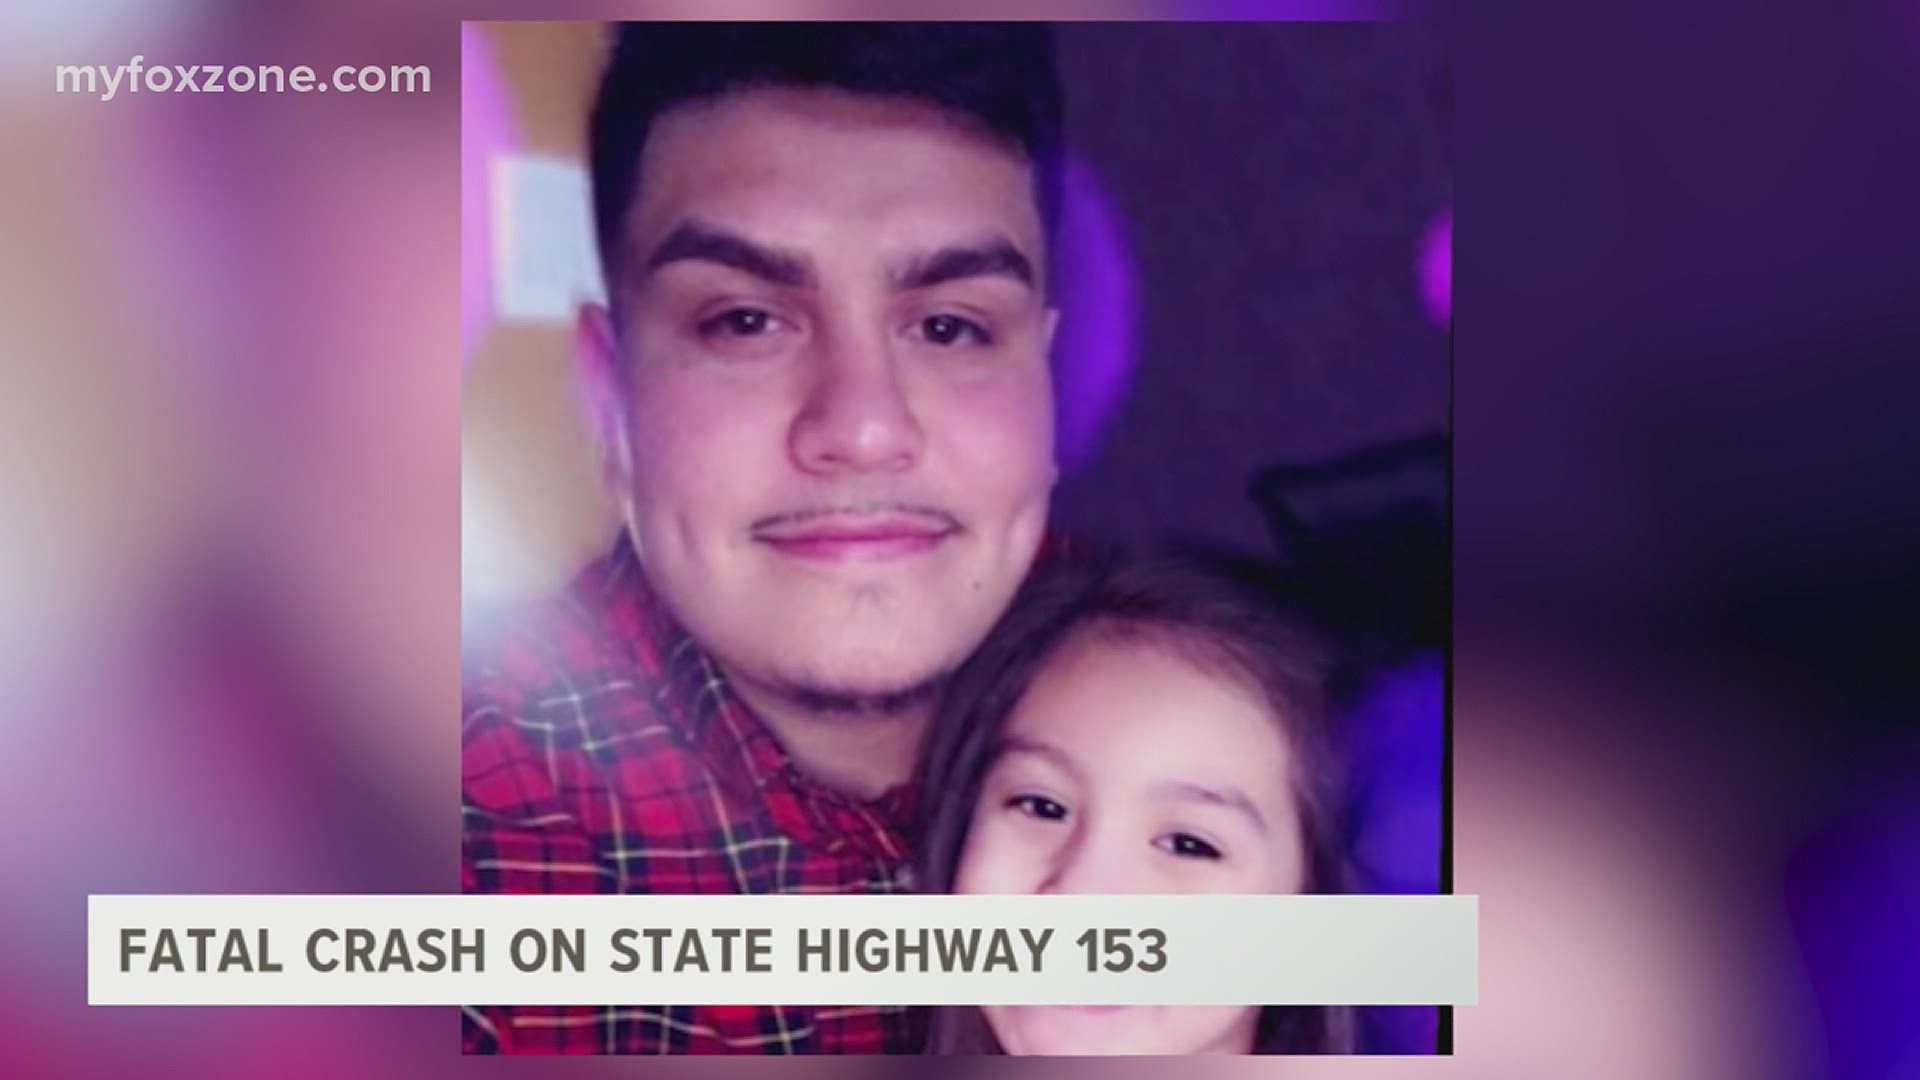 After a fatal accident occurred, it left3 people dead and now the father of the victim hopes to be released from prison to attend her funeral.